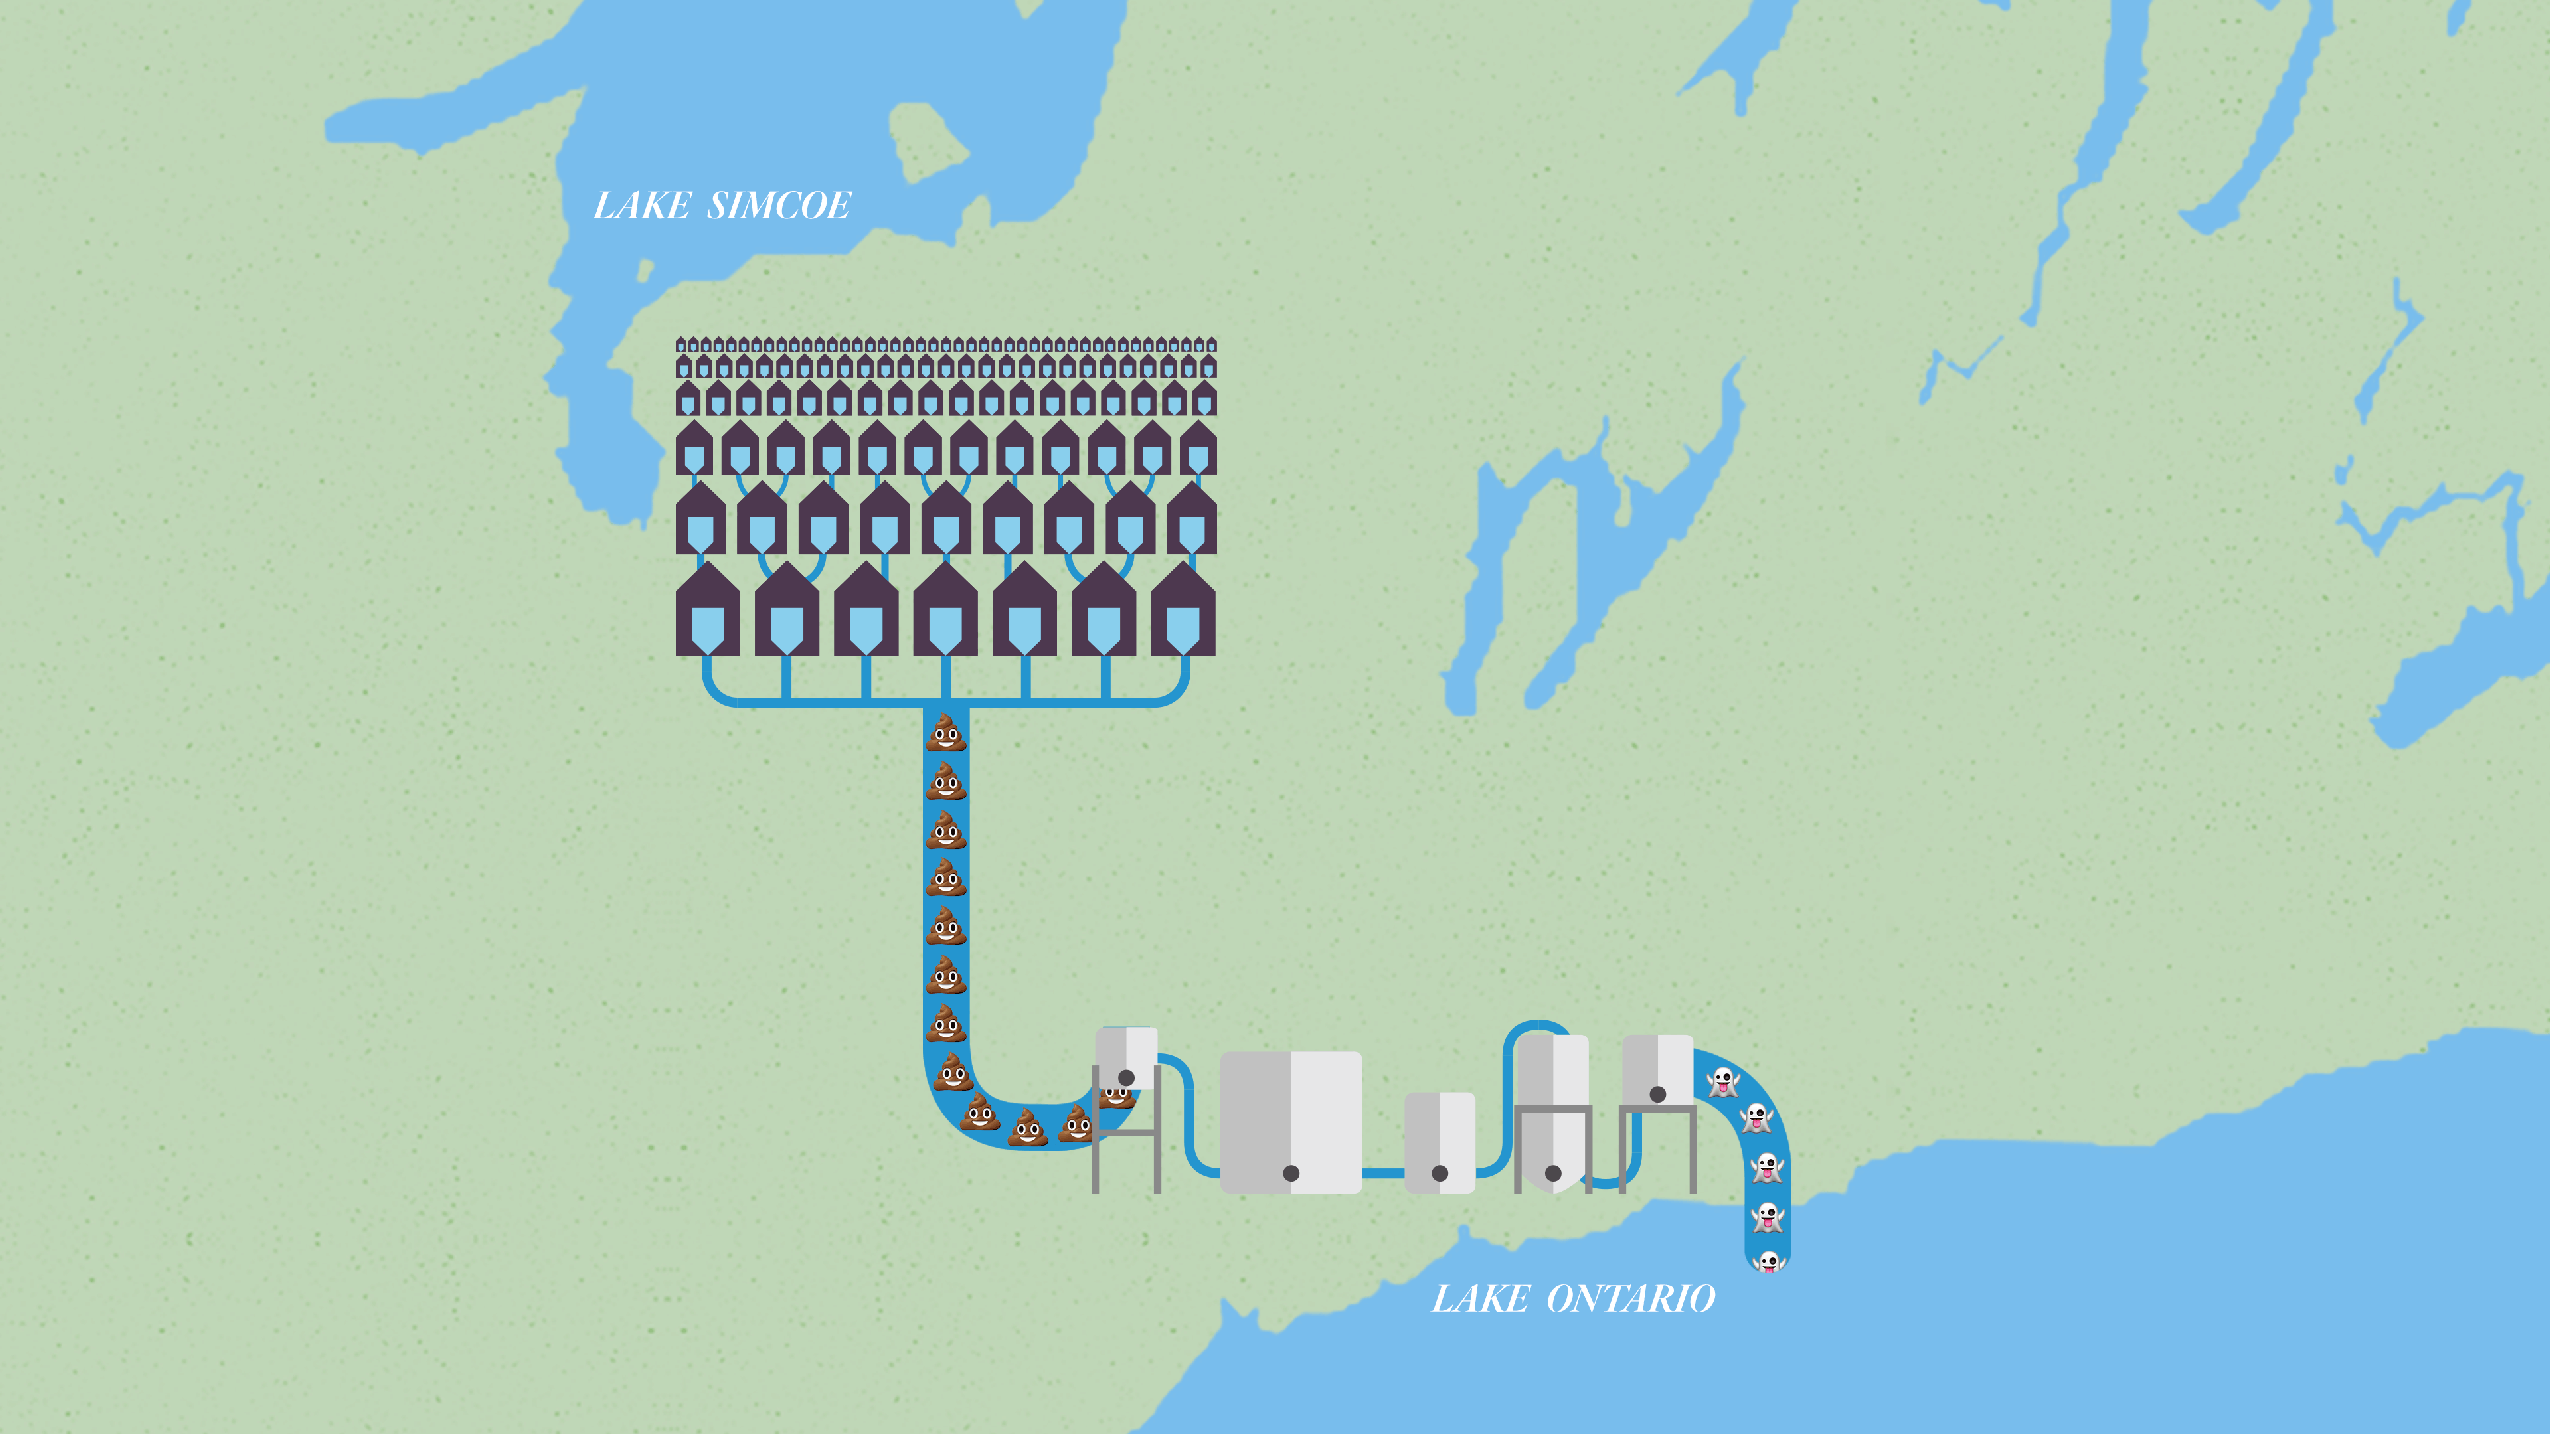 Animated illustration of sewage from the York region being treated and emptying into Lake Ontario.